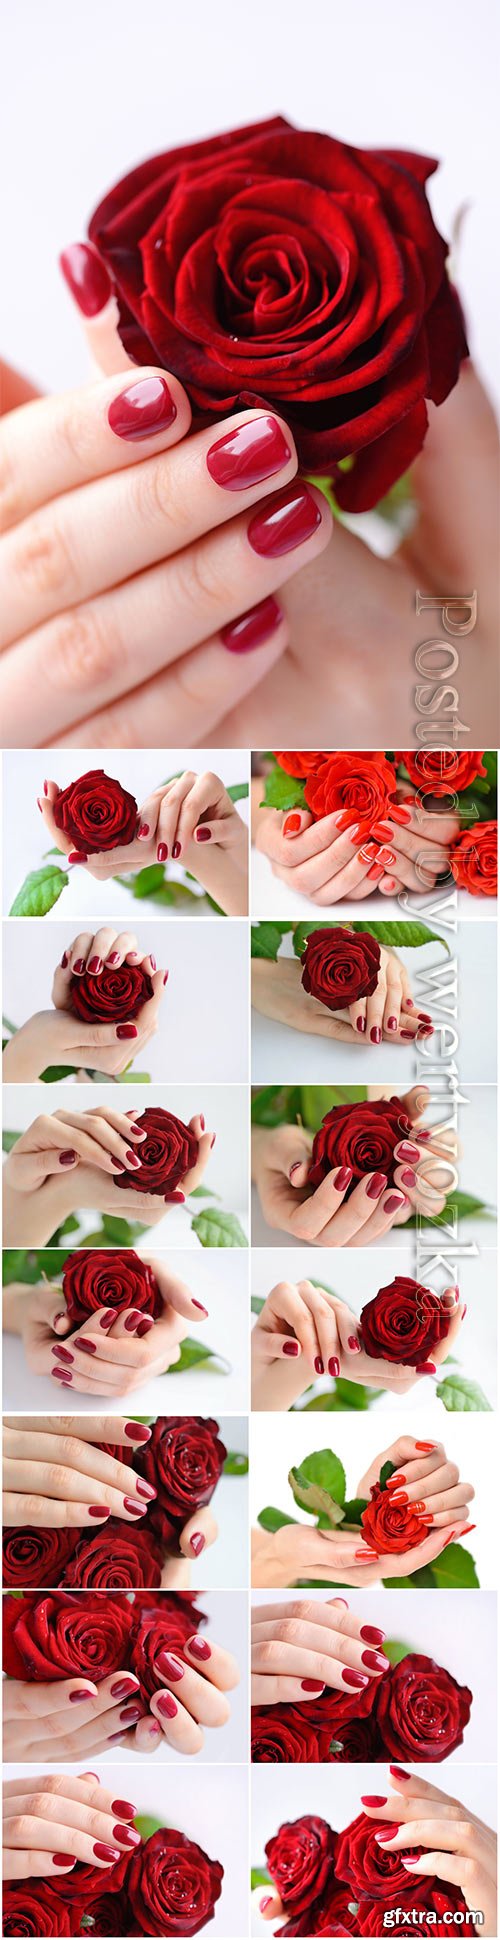 Manicure, female hands with a rose beautiful stock photo